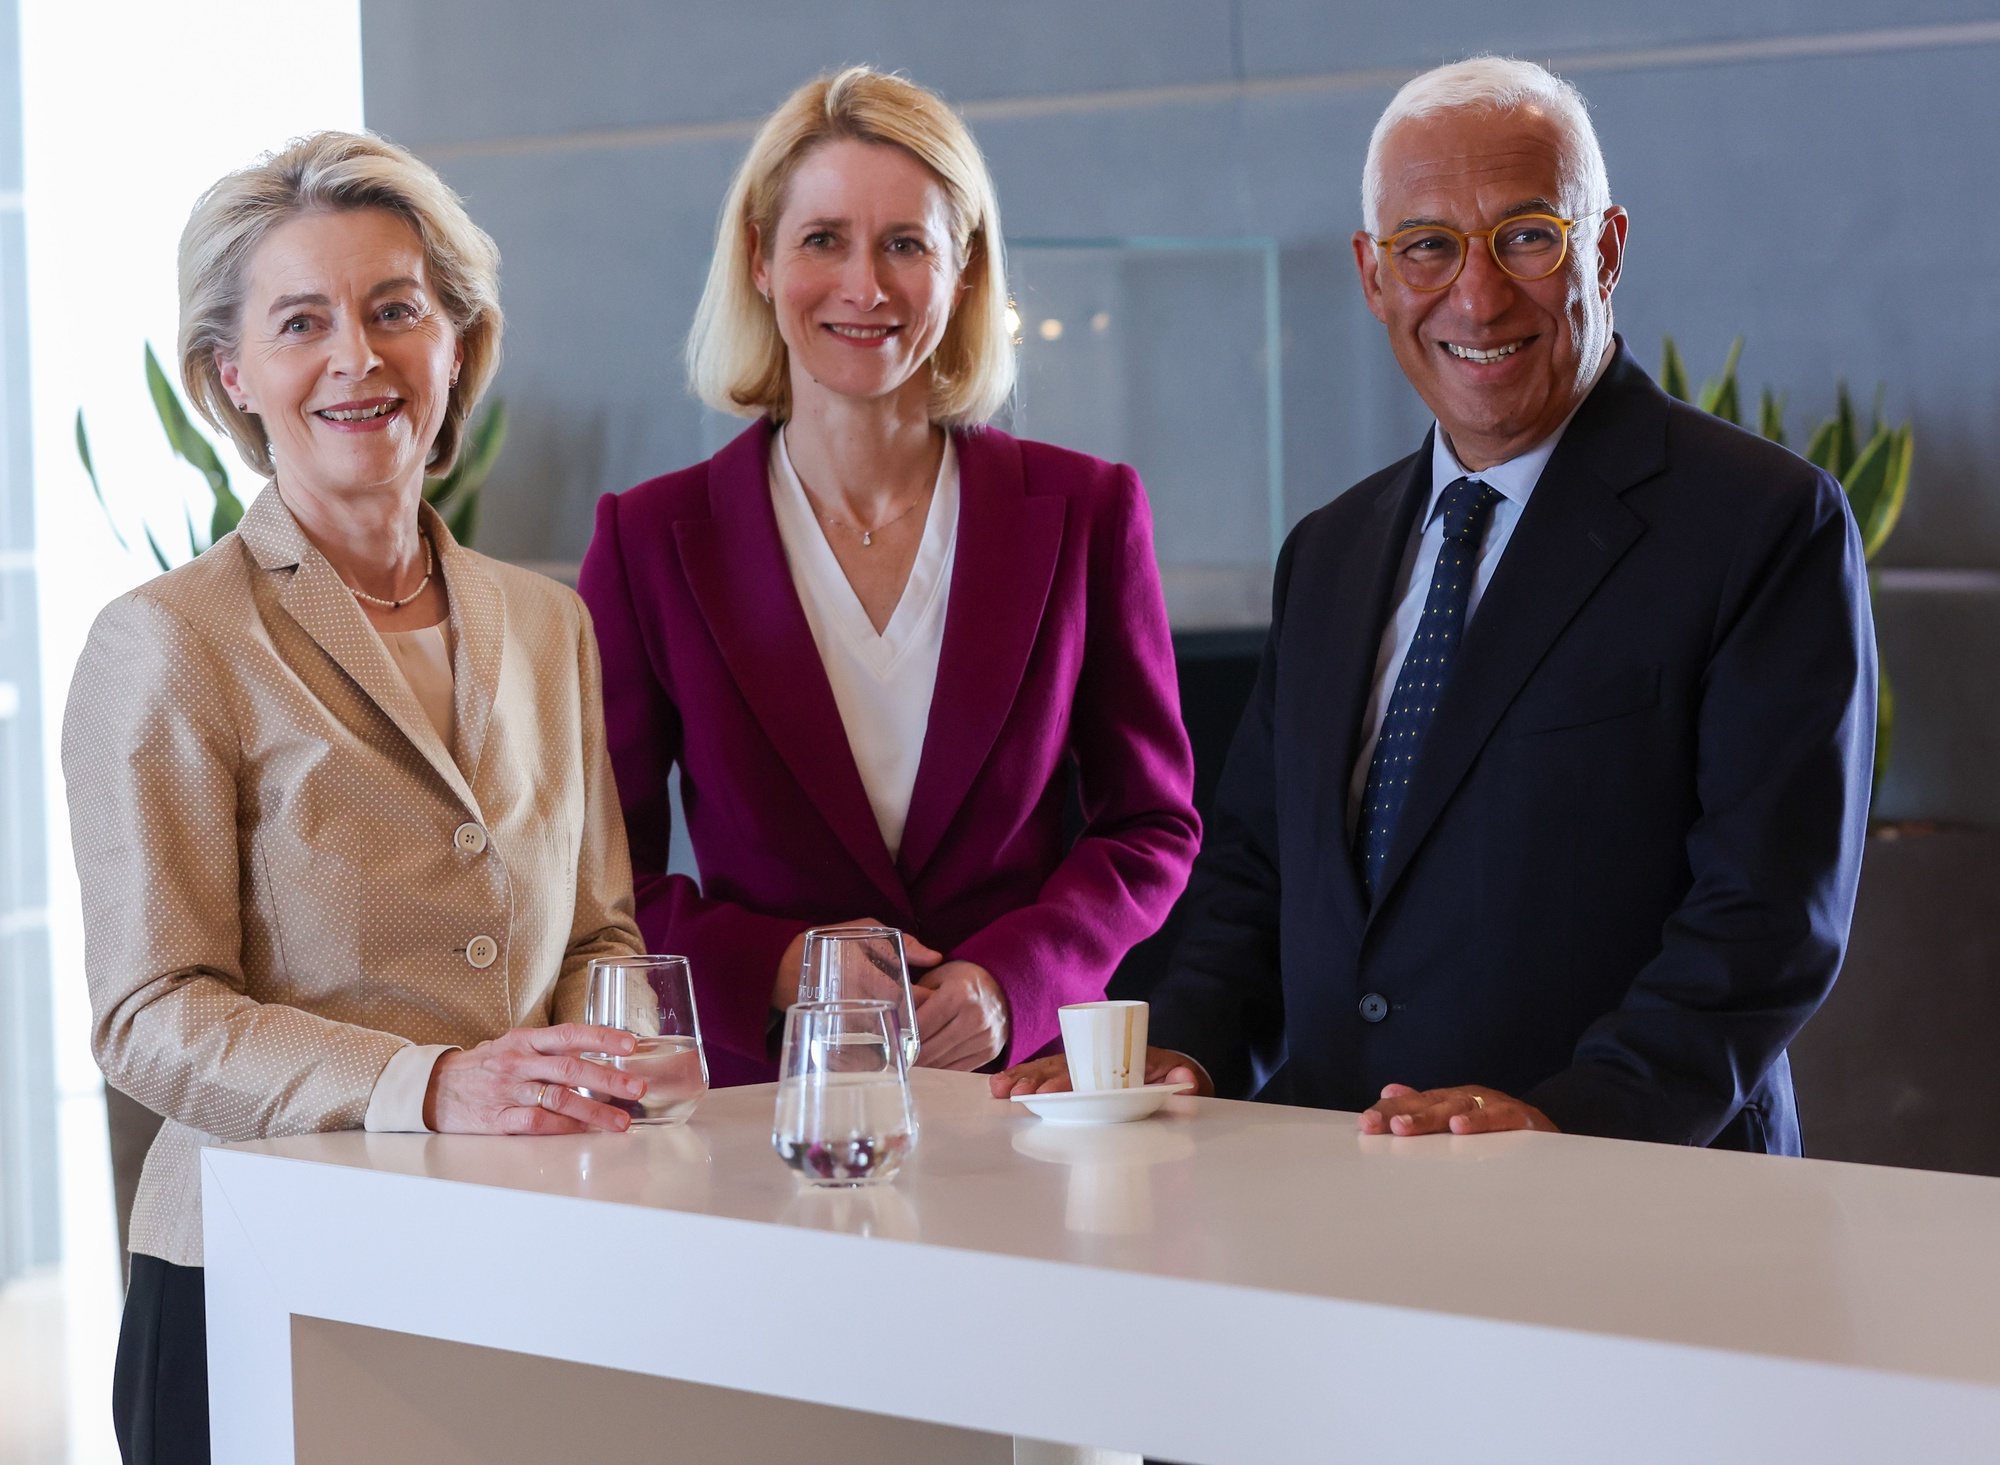 epa11443269 (L-R) European Commission President Ursula Von der Leyen, Estonian Prime Minister Kaja Kallas, and former Portuguese Prime Minister Antonio Costa, during a meeting  at Brussels Airport, a day after the EU summit in Brussels, Belgium, 28 June 2024. EU leaders agreed on proposing Ursula Von der Leyen as candidate for President of the European Commission and Kaja Kallas as High Representative of the Union for Foreign Affairs and Security Policy, while Antonio Costa was elected as European Council President during a summit to discuss the Strategic Agenda 2024-2029, the next institutional cycle, Ukraine, the Middle East, competitiveness, security and defense, among other topics.  EPA/OLIVIER HOSLET / POOL